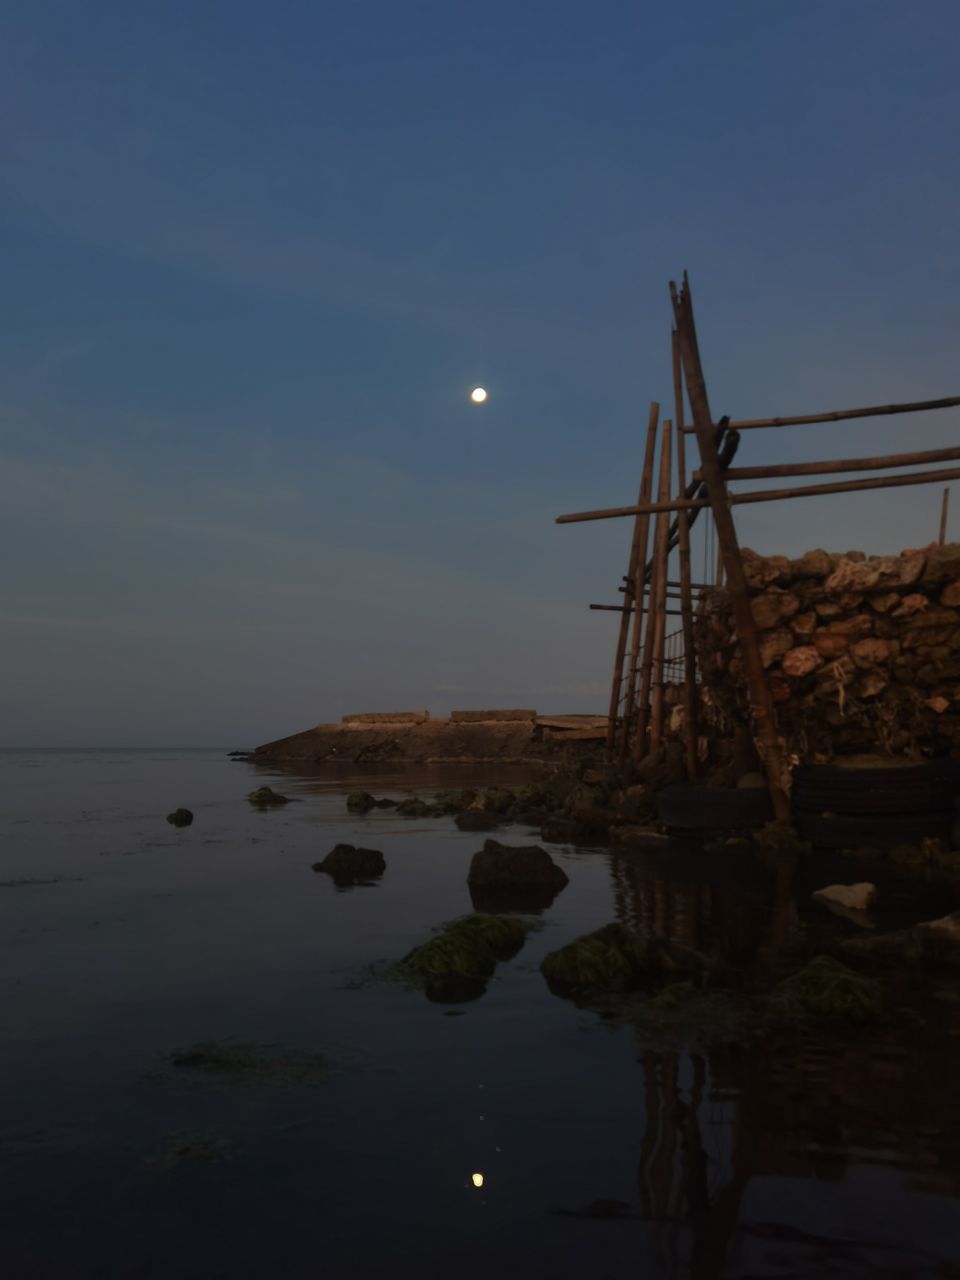 moon, sky, water, sea, ocean, reflection, nature, coast, evening, beauty in nature, no people, tranquility, scenics - nature, dusk, horizon, tranquil scene, full moon, night, land, architecture, sunset, built structure, outdoors, beach, light, moonlight, rock, shore, horizon over water